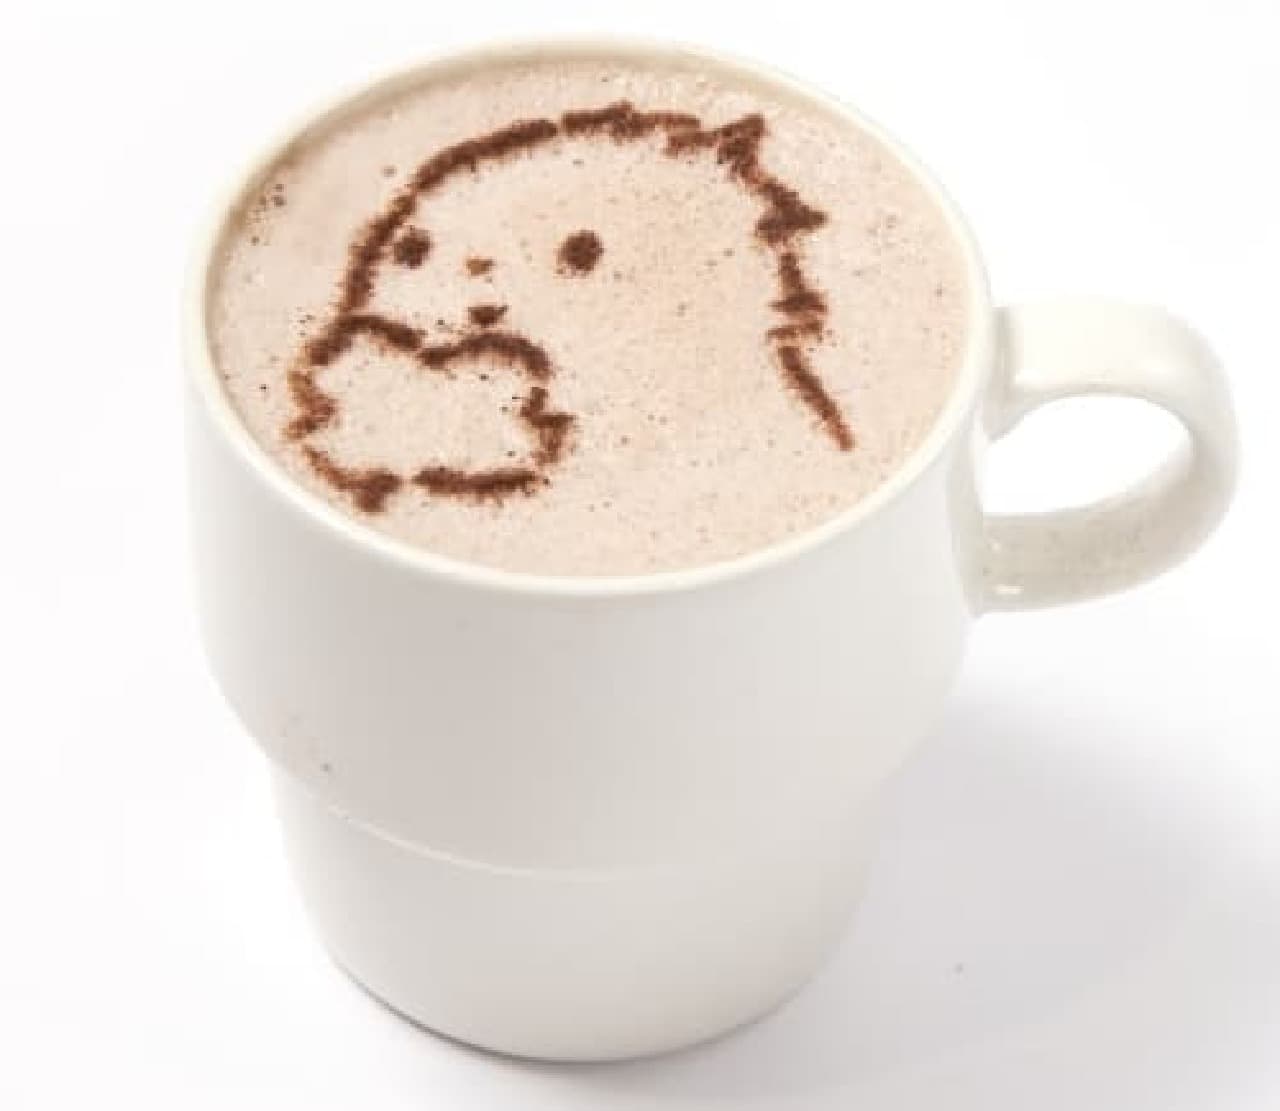 A girl cafe that takes time "Chiko's" relieved "hot cocoa"